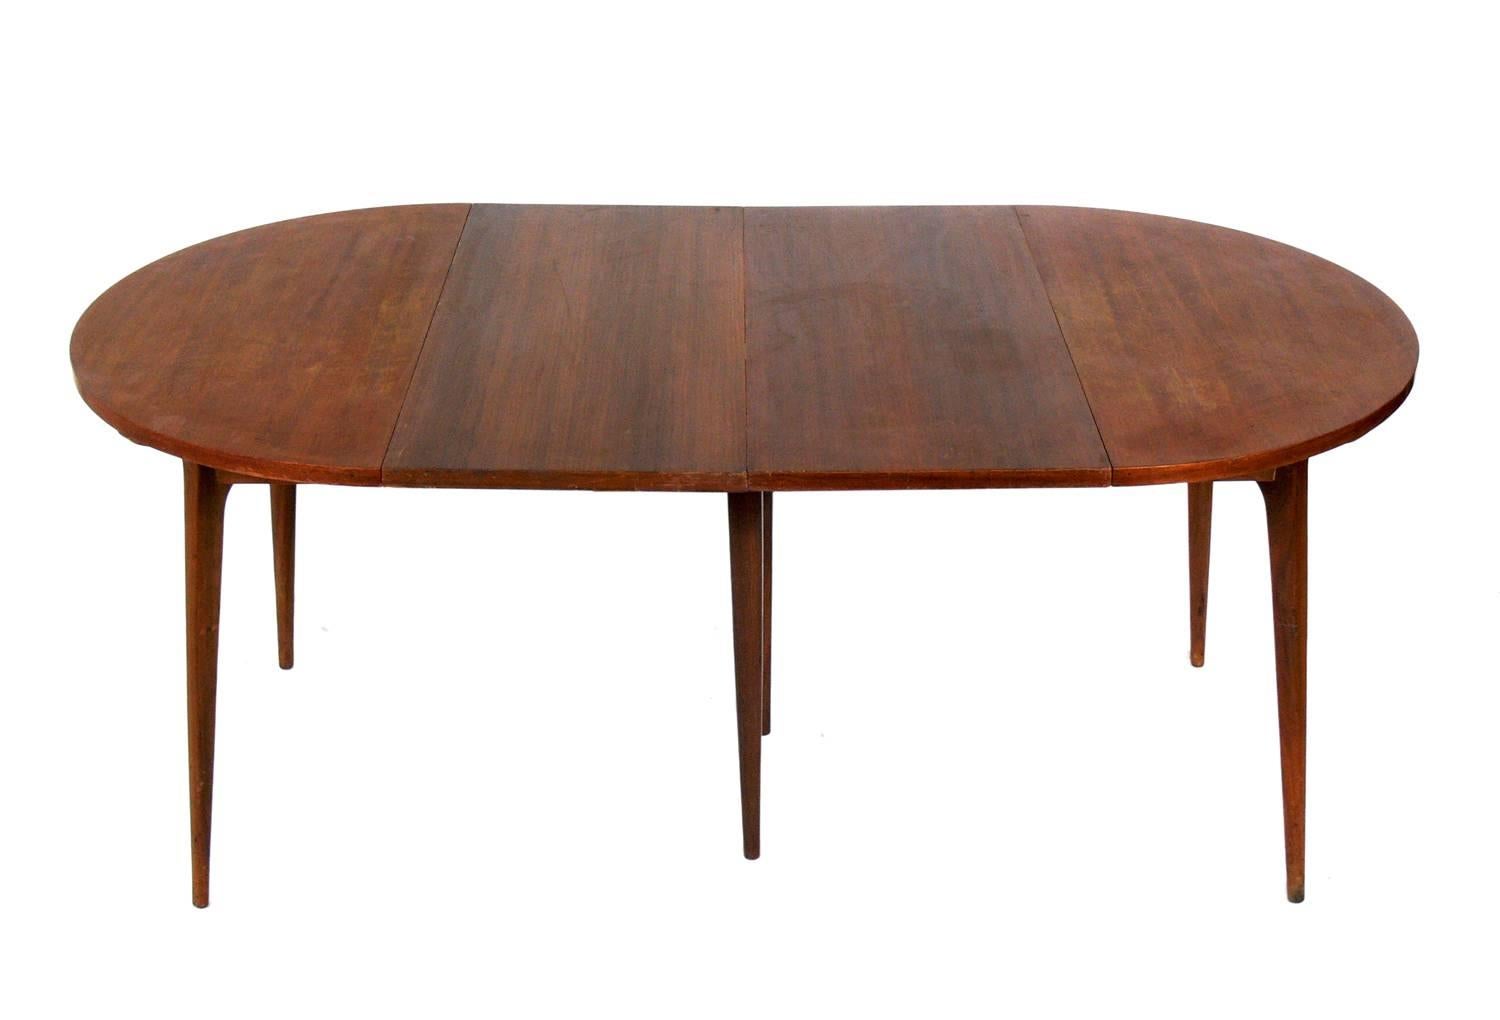 Modern dining table, designed by Bertha Schaefer for Singer and Sons, circa 1950s. Schaefer was one of the leading female designers of the era, and designed this line for Singer and Sons with her contemporaries Gio Ponti, Carlo de Carli, and Franco